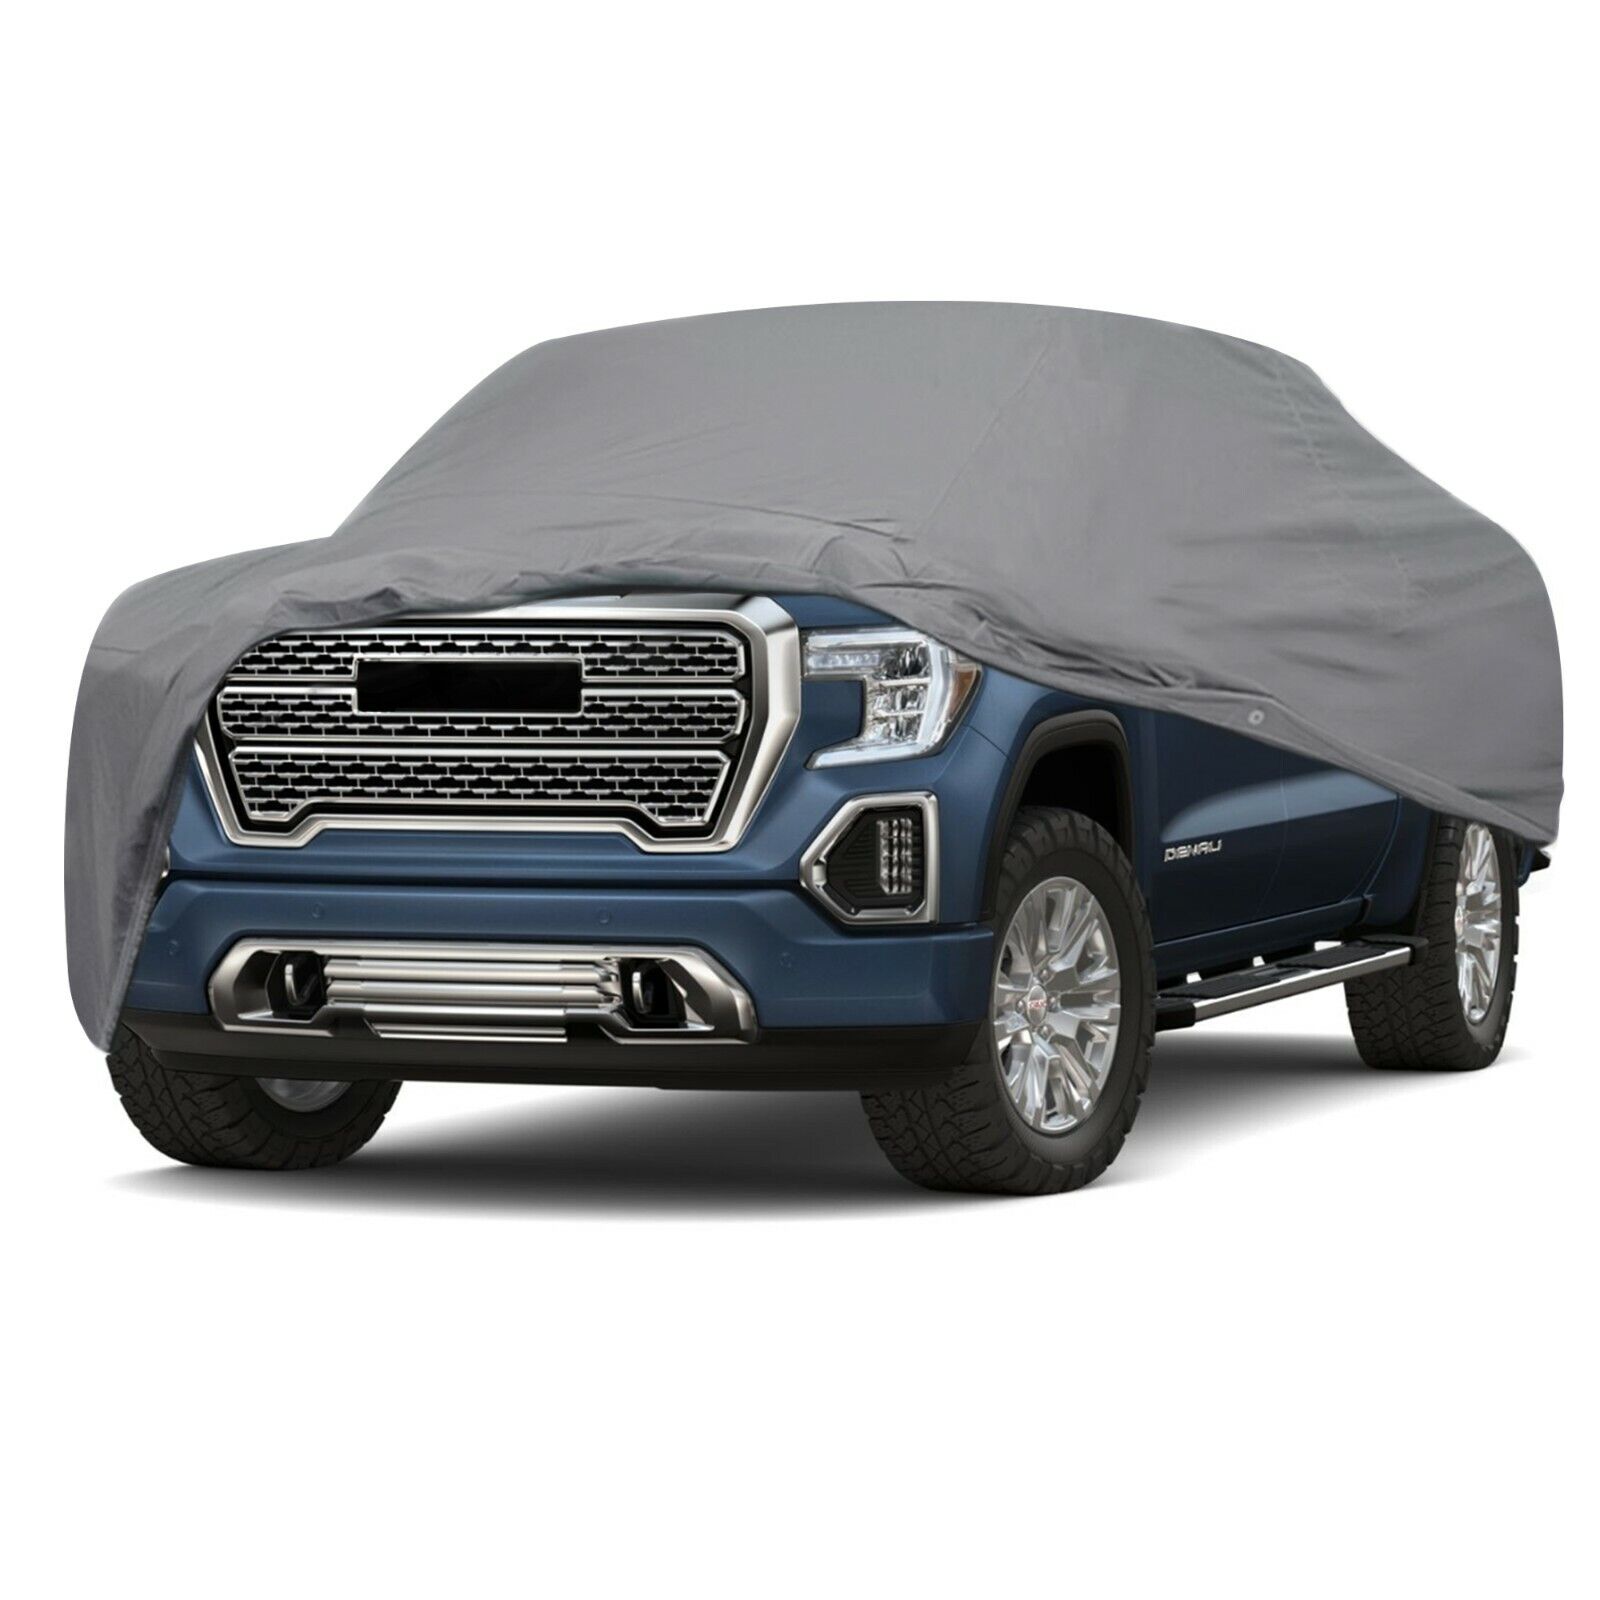 [CCT] Semi-Custom Fit Full Truck Cover For Chevy Avalanche 2001-2013